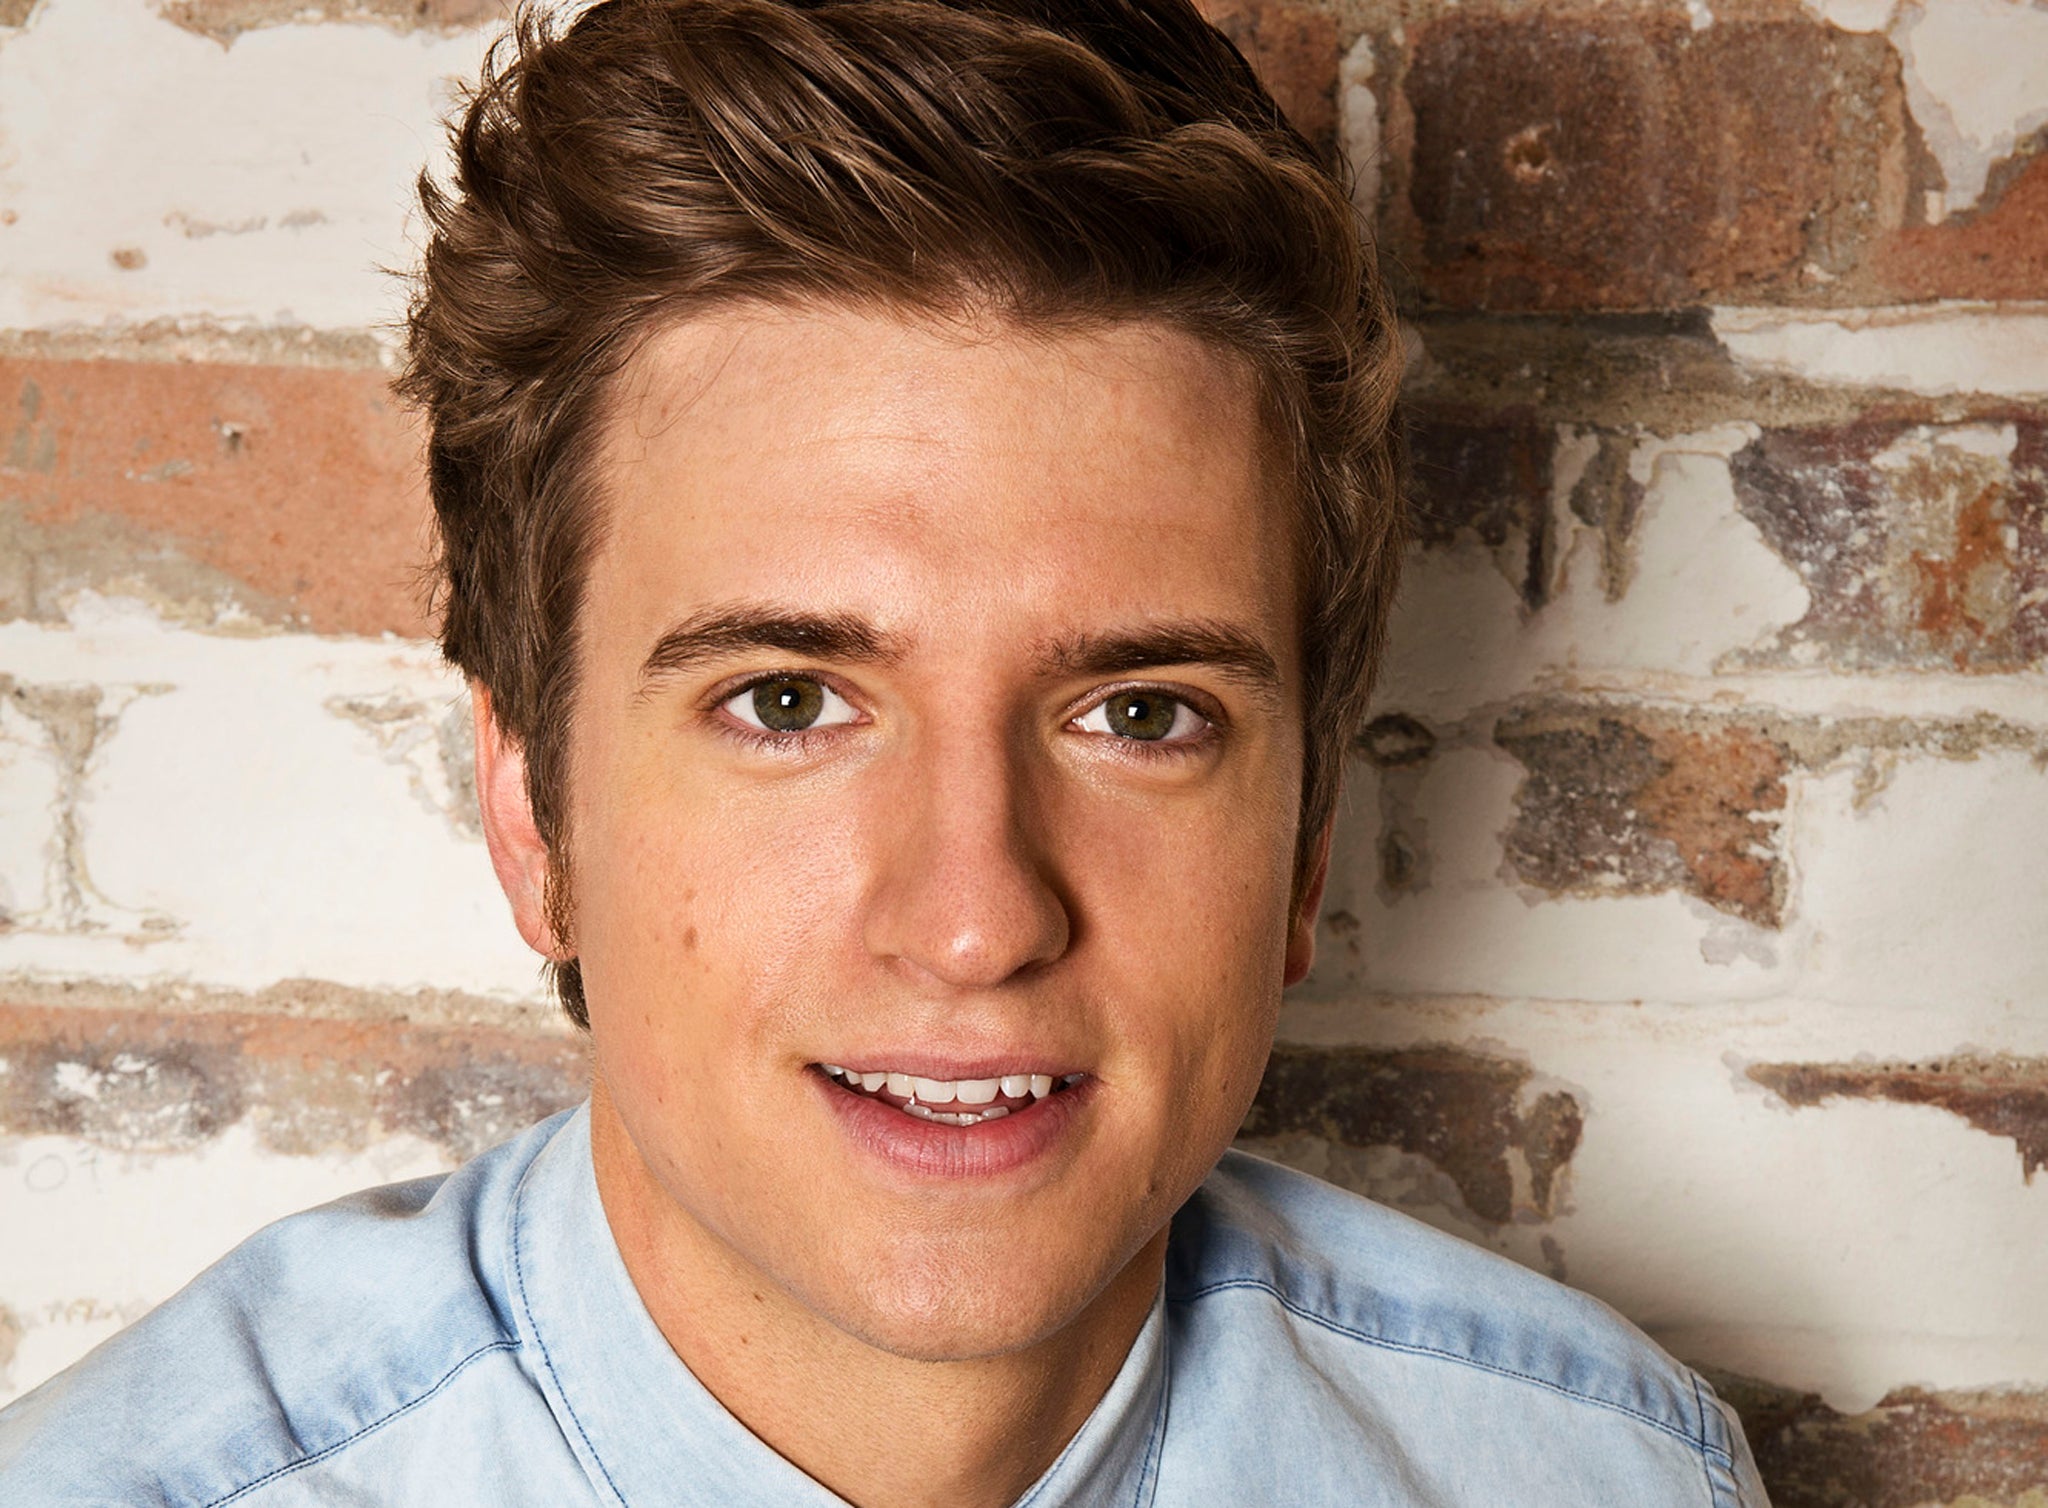 Greg James will host Radio 1's new Top 40 show on Friday nights